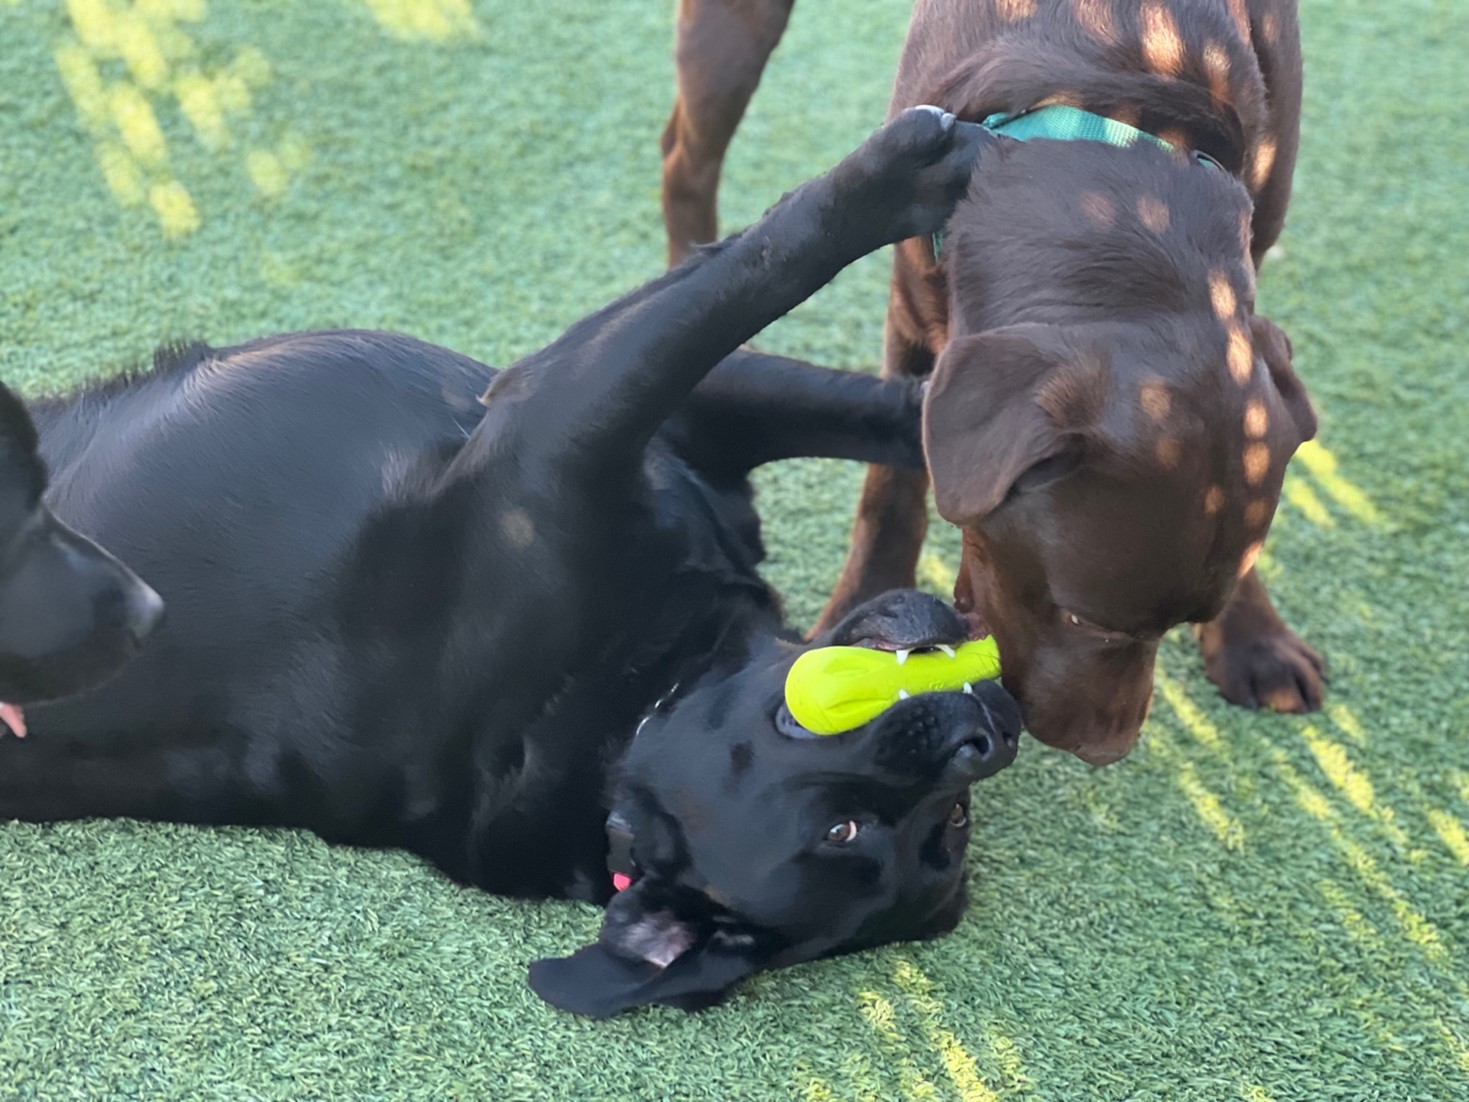 Two dogs, a black lab and a chocolate lab play together